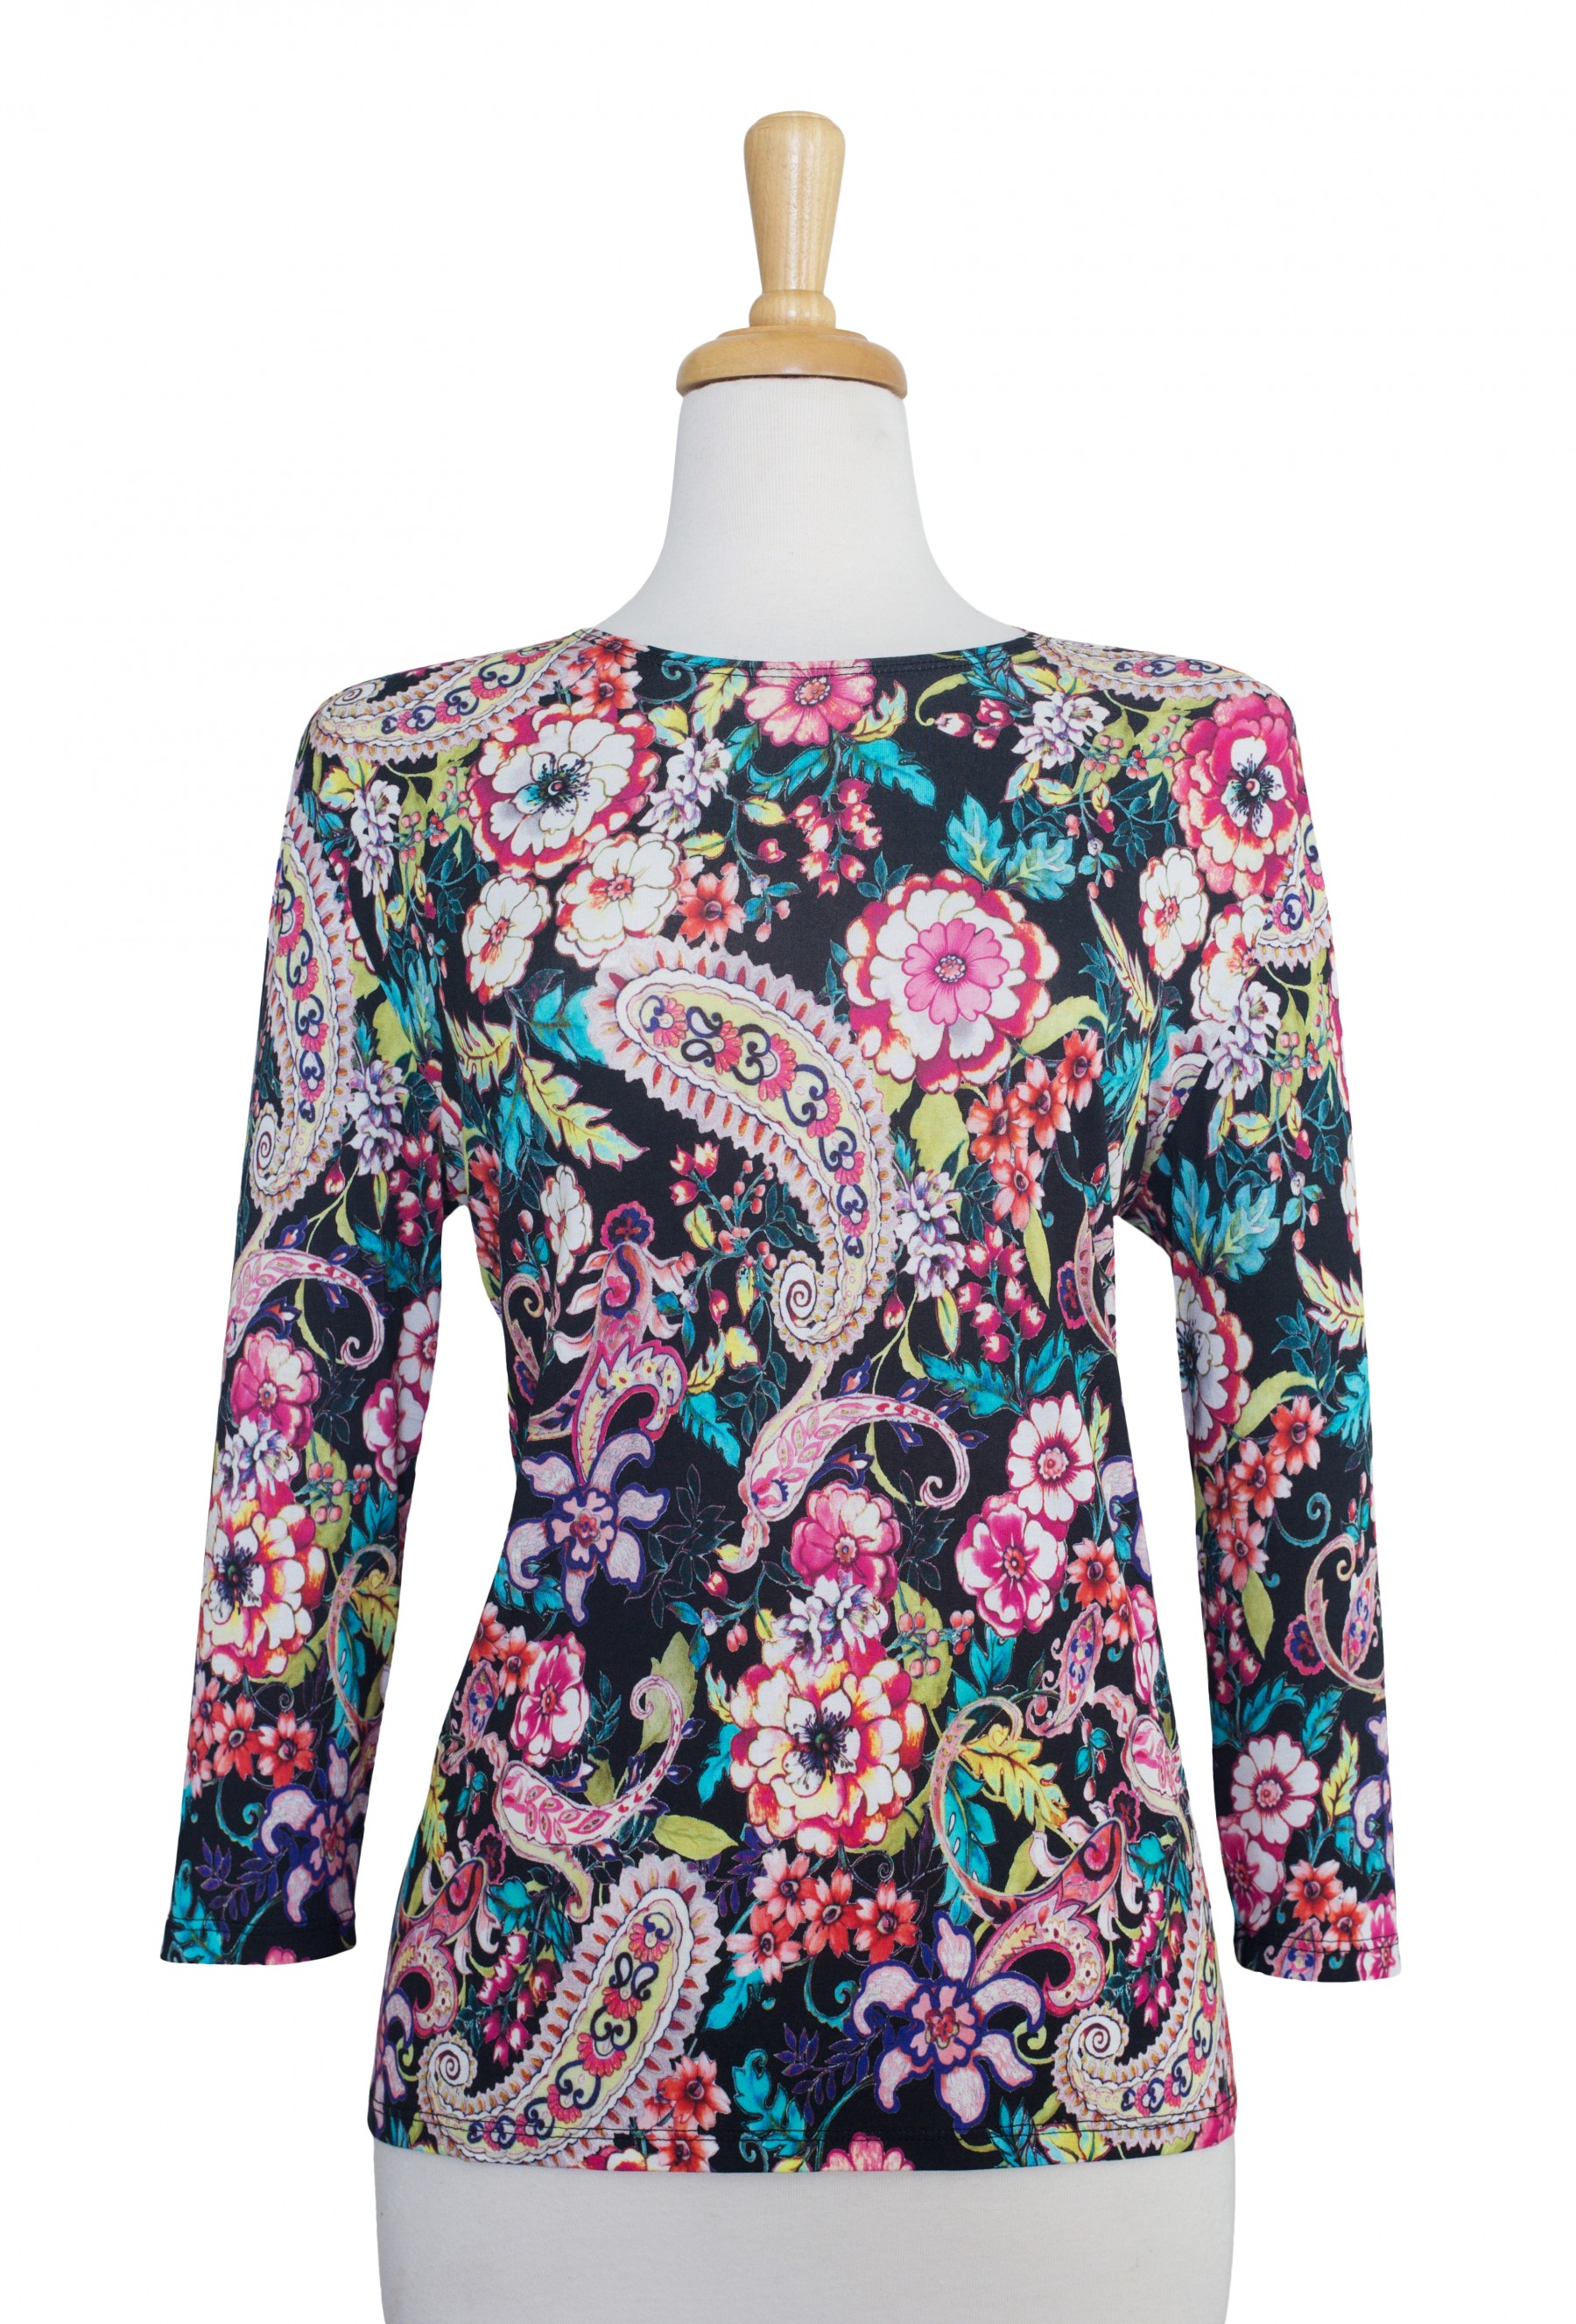 Black and Multi Color Paisley and Floral 3/4 Sleeve Cotton Top - TOPS